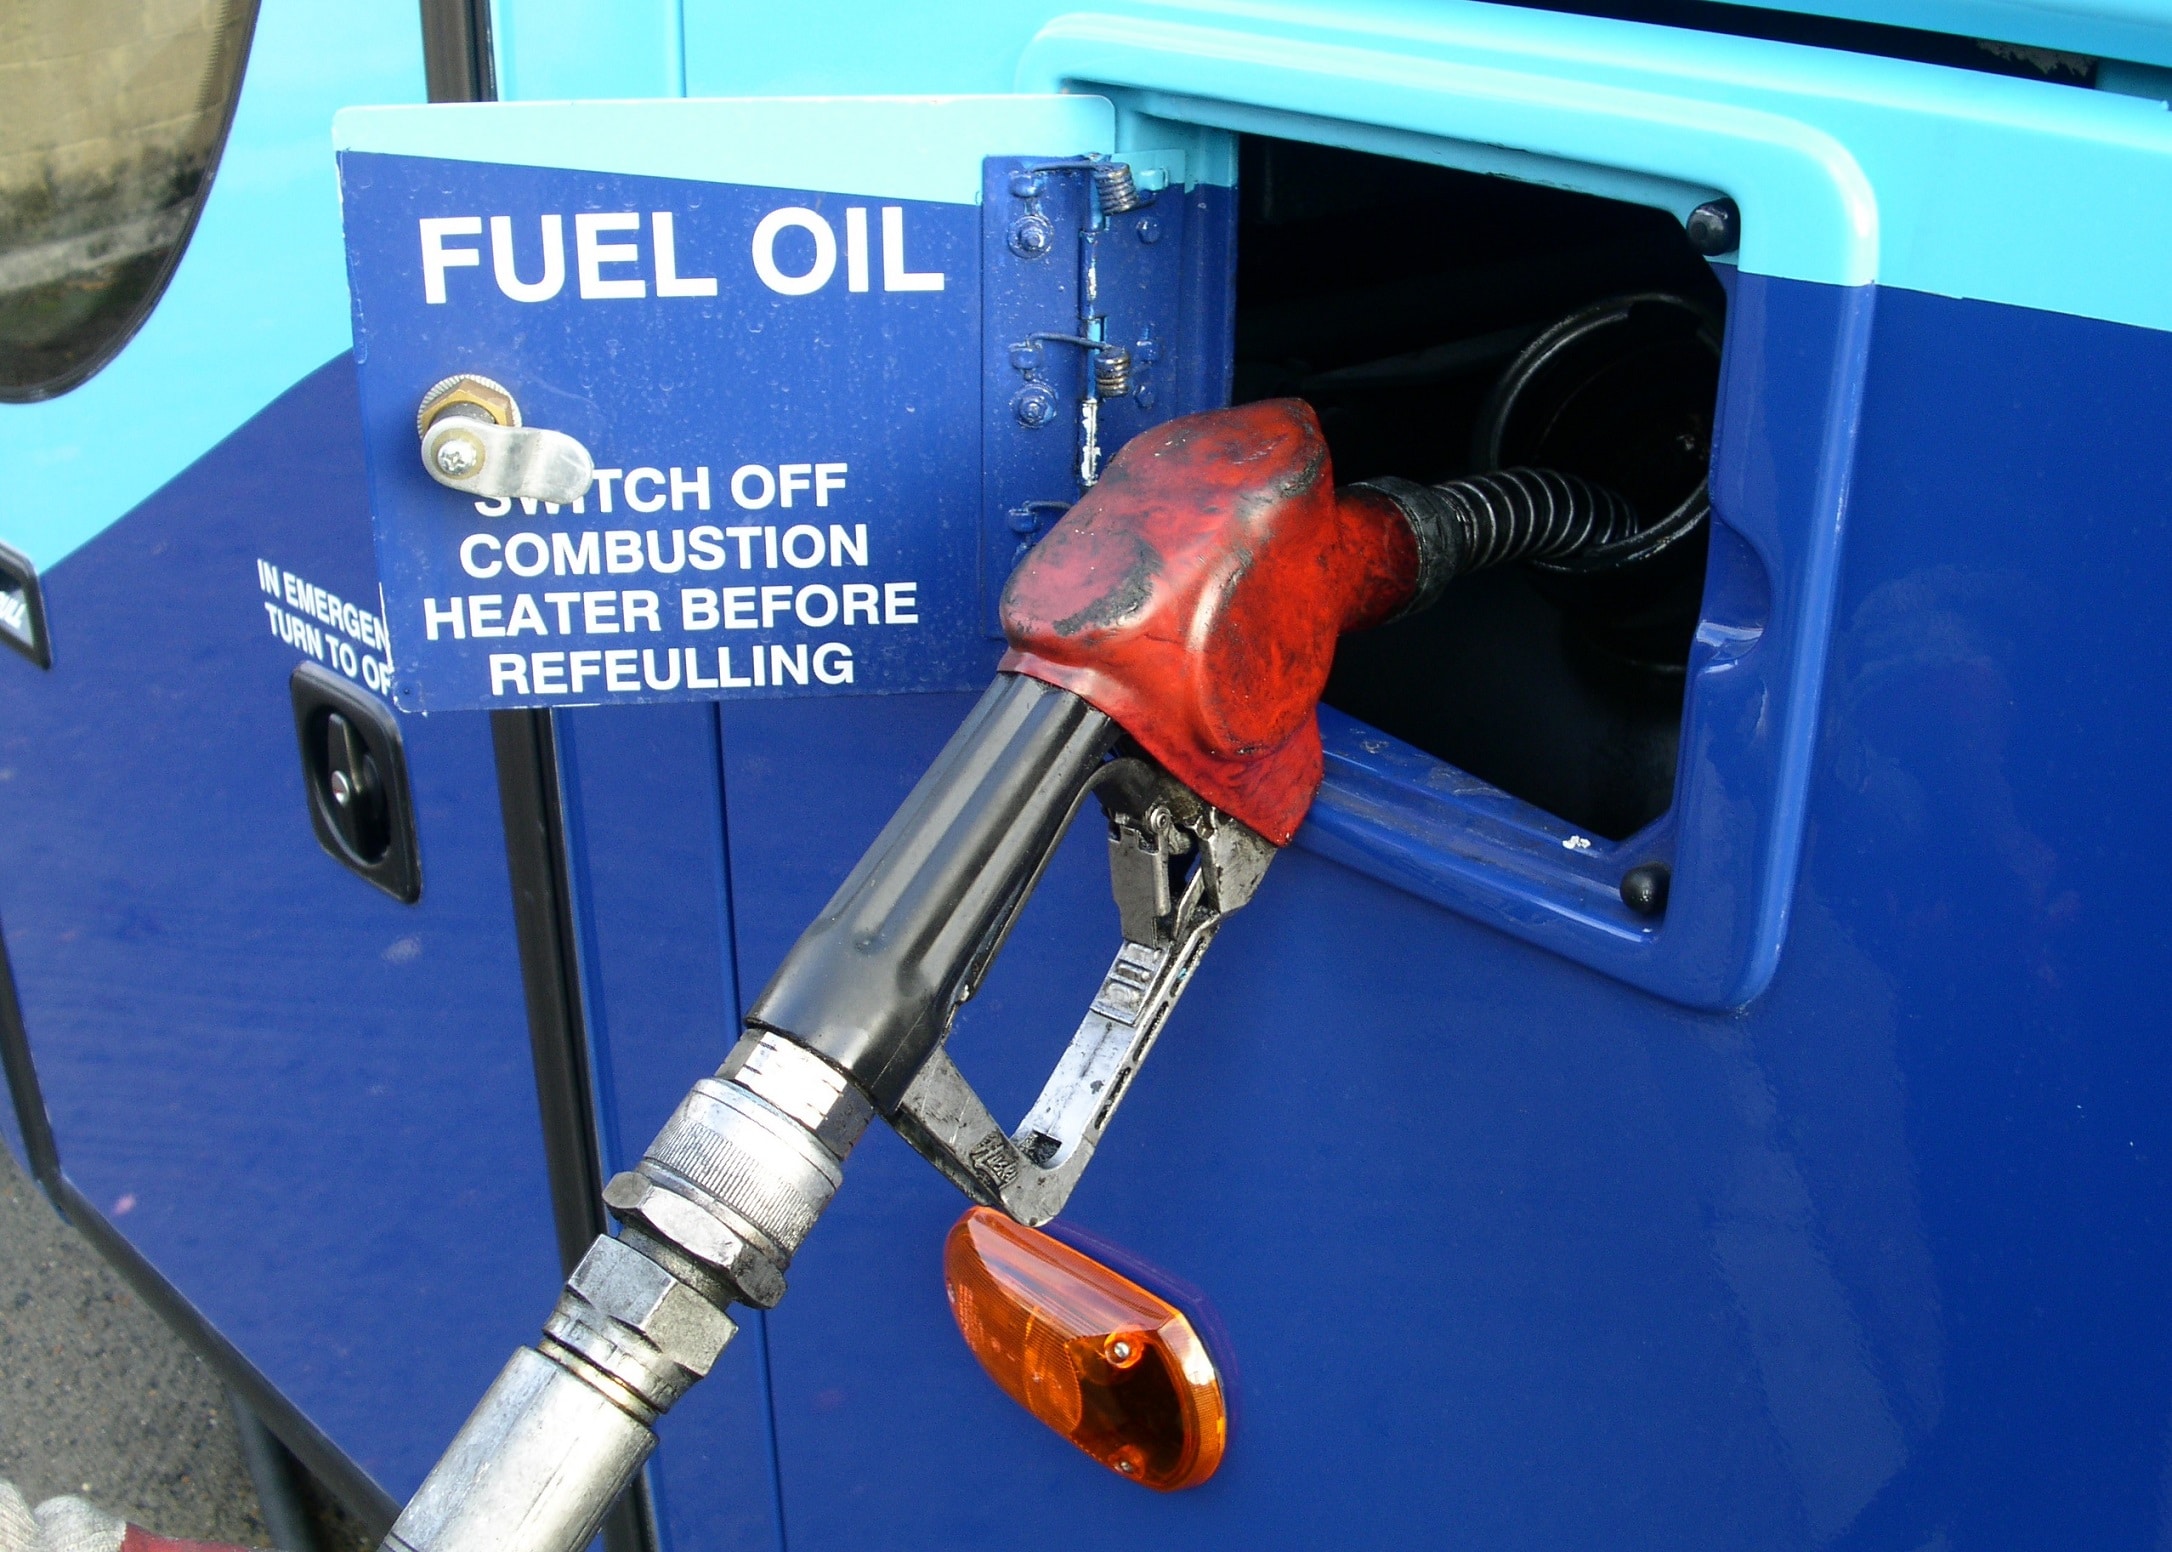 Bulk diesel price increased by almost half in 12 months to March